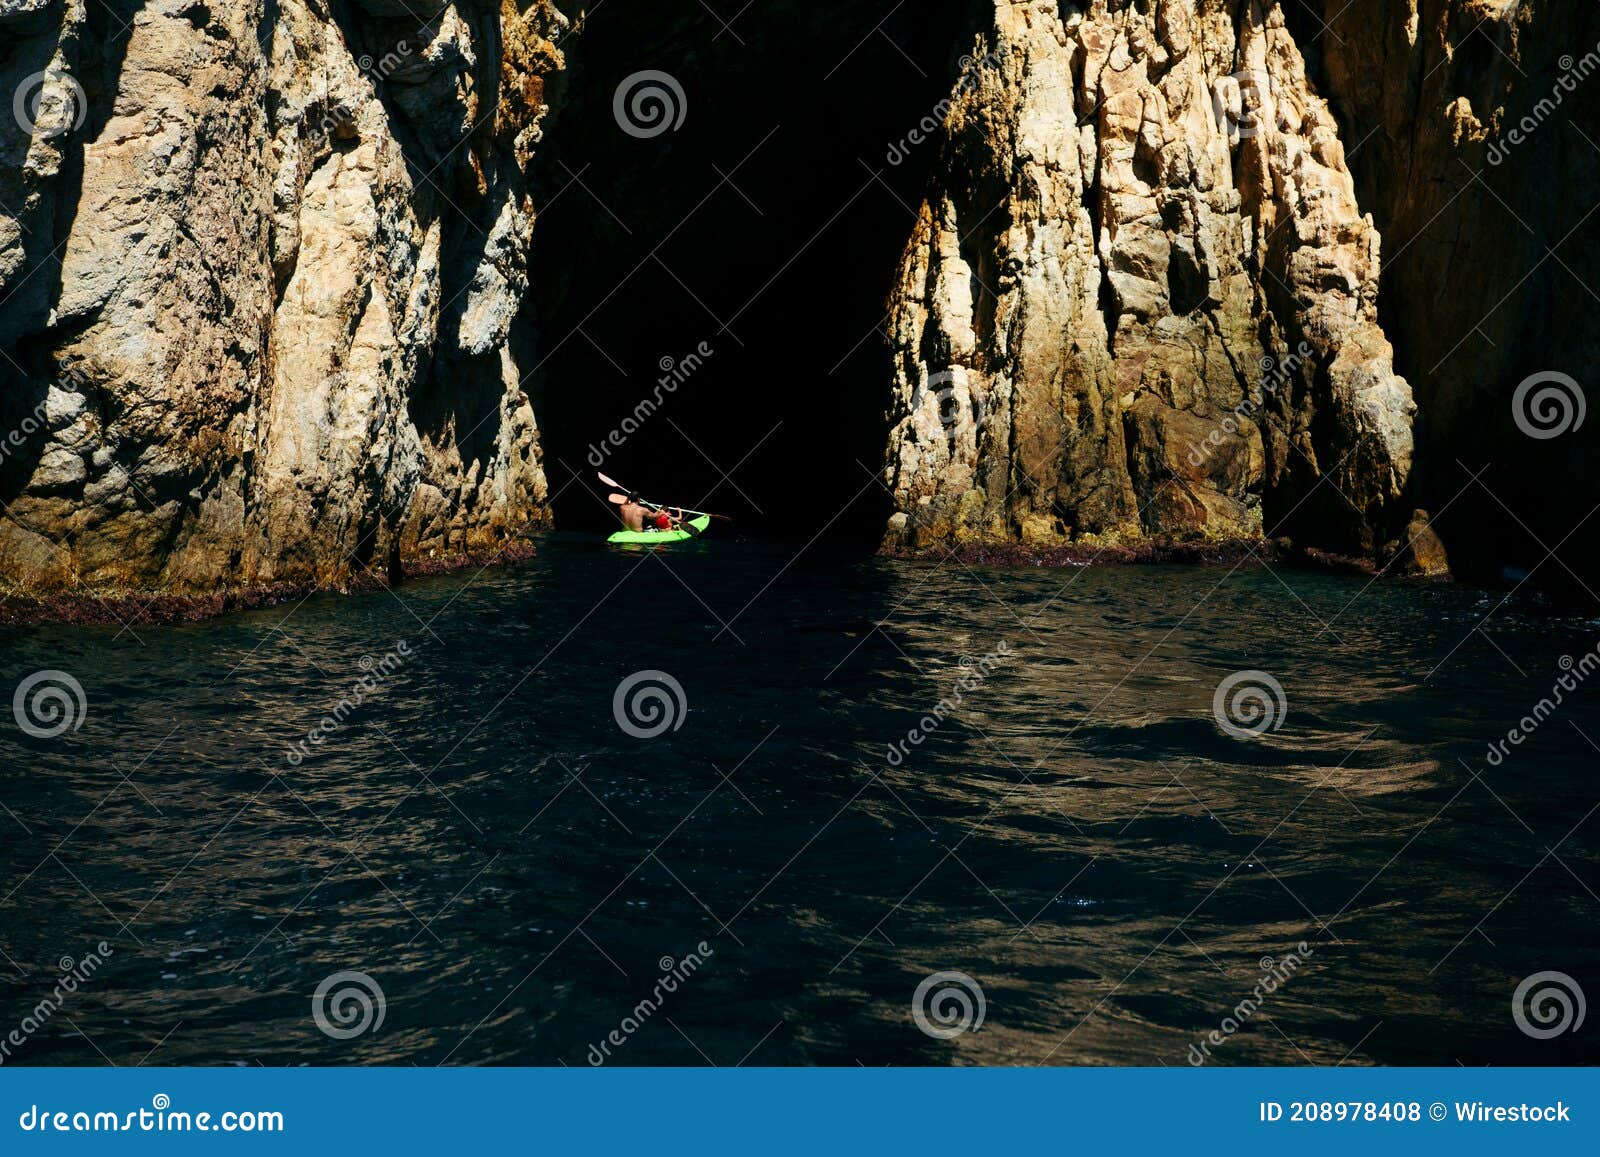 selective focus - father and son rowing in a canoe to enter a natural cave in the mediterranean sea